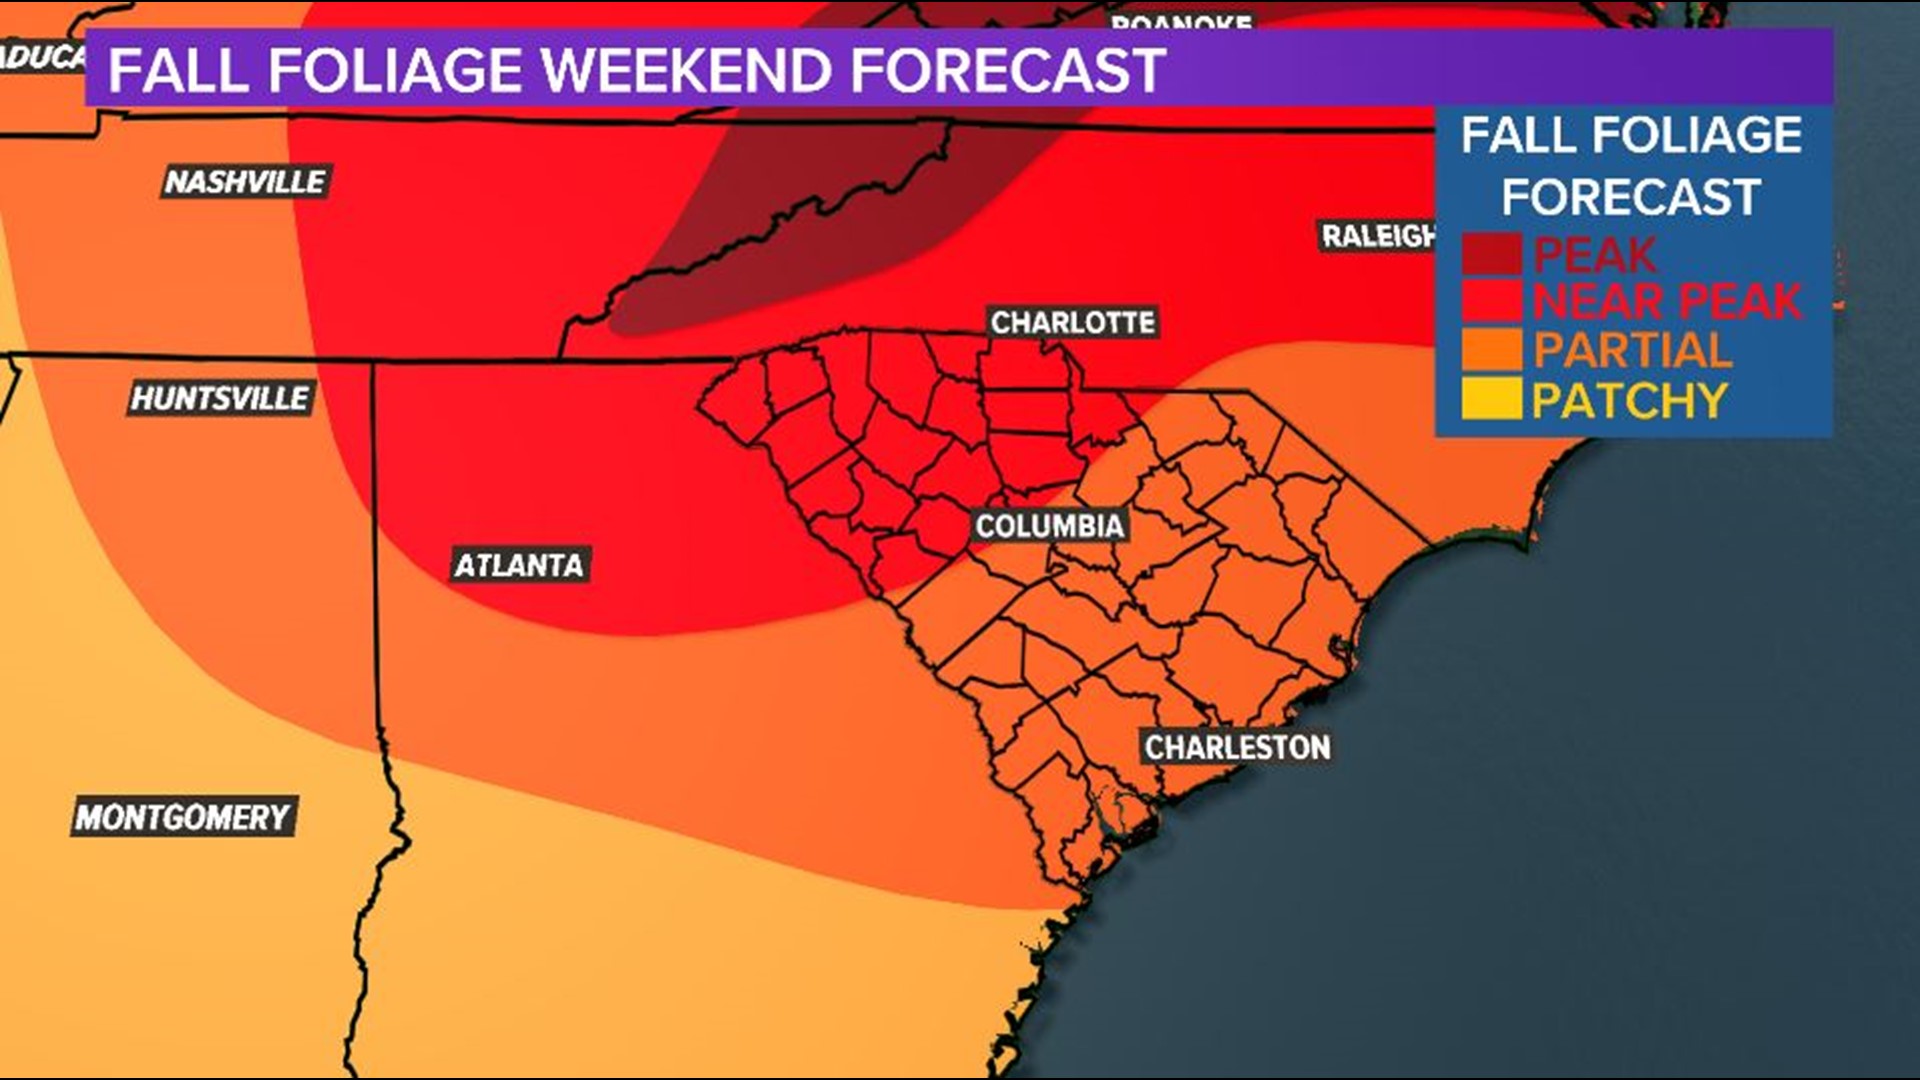 Fall foliage nearing peak colors in Upstate South Carolina this weekend